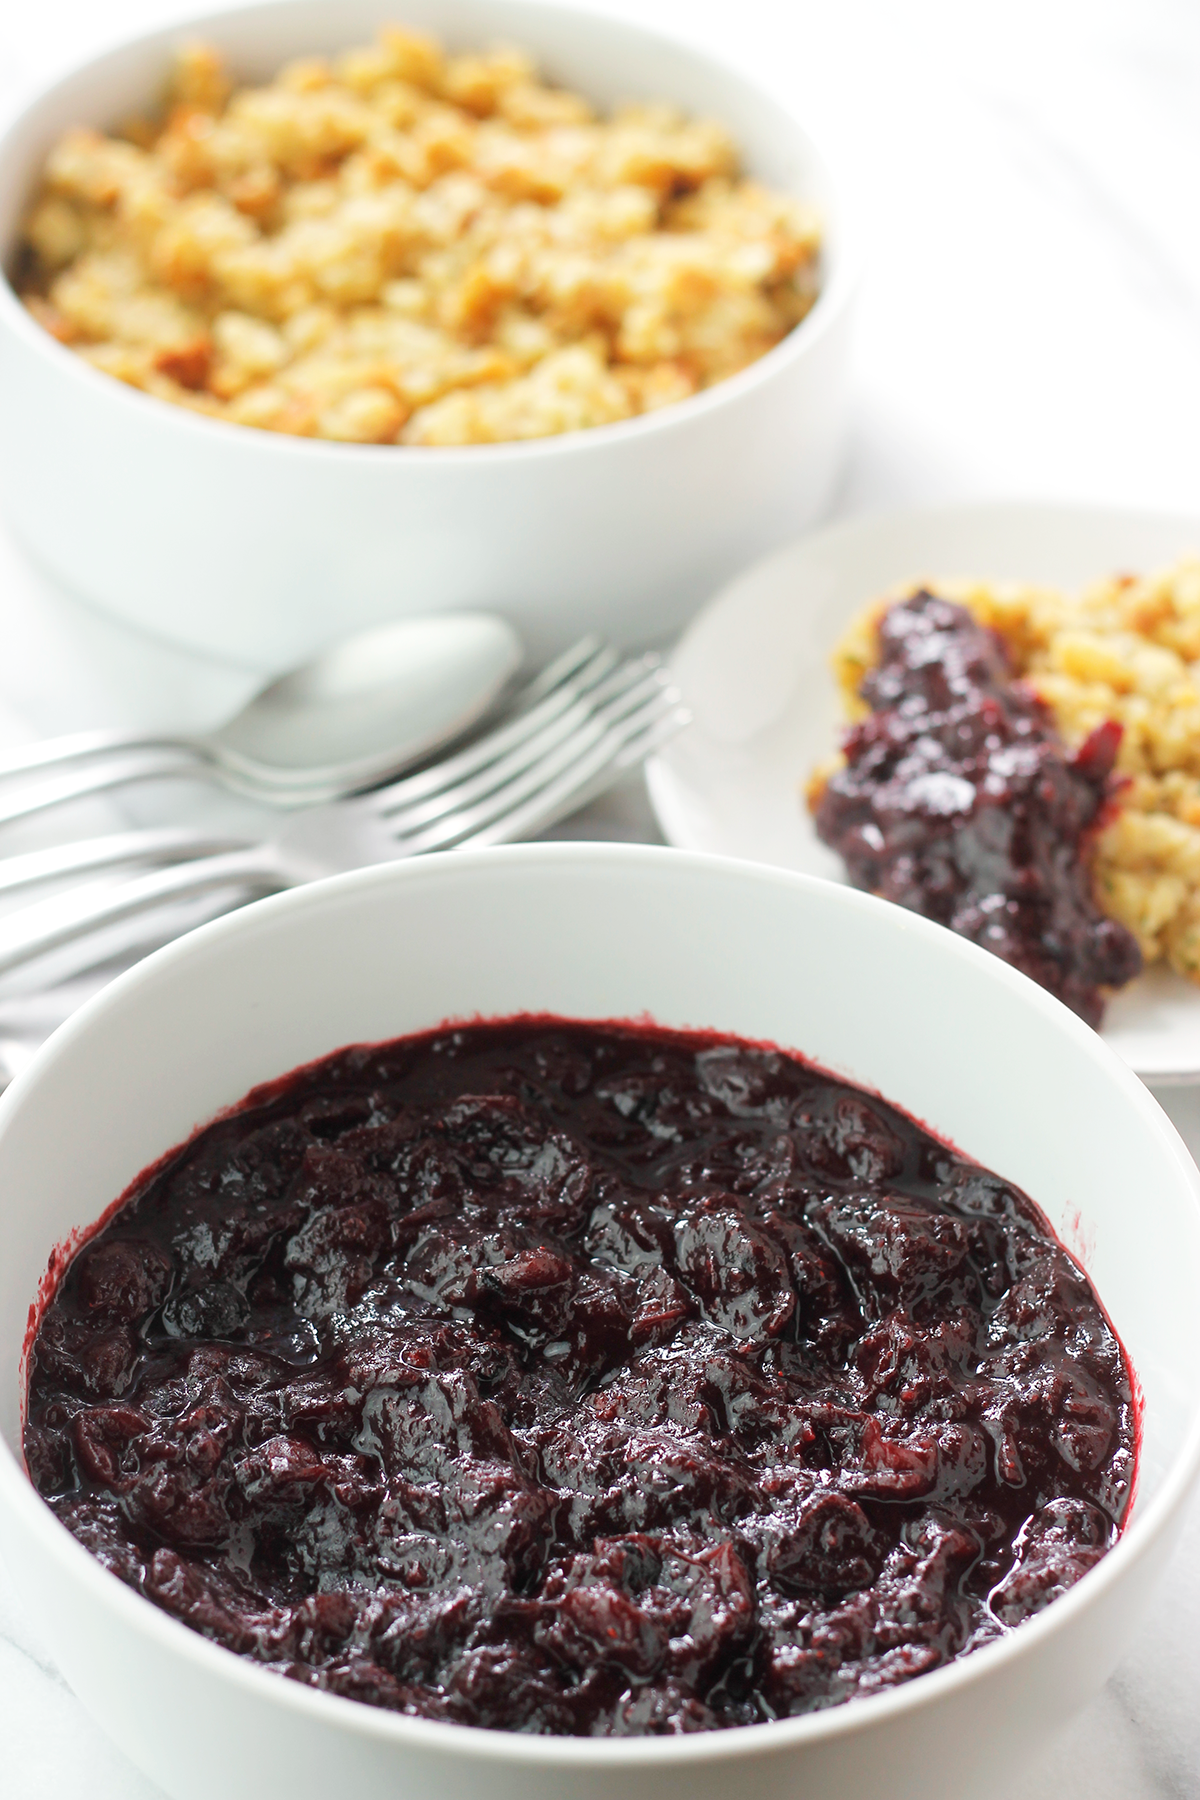 Bowl of cran-blueberry sauce with a bowl of stuffing and flatware in the background, and a small plate of stuffing with some cran-blueberry sauce  spooned over the stuffing.